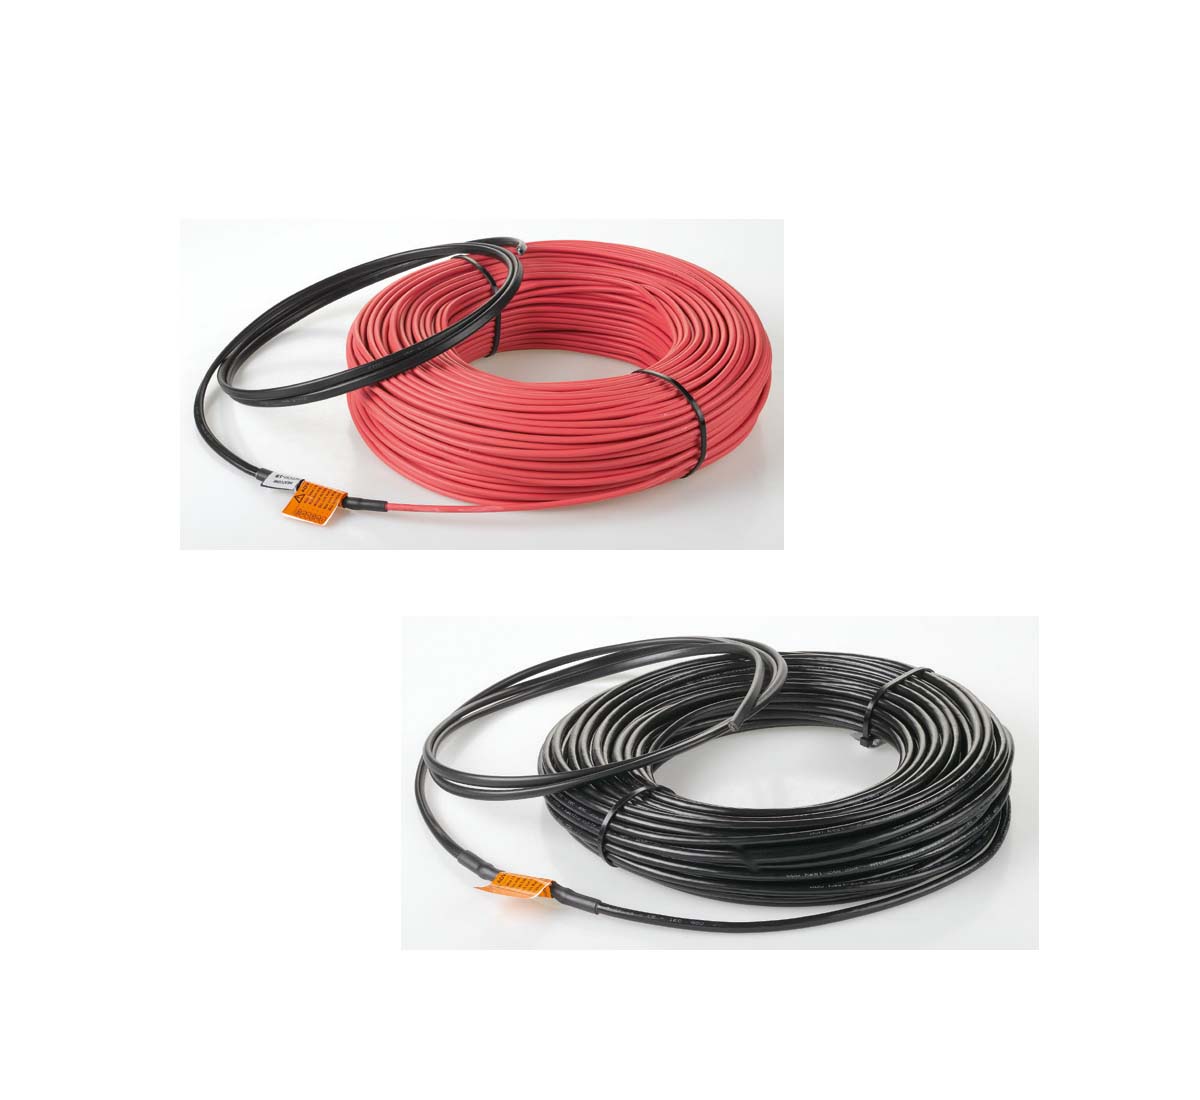 A picture of series resistance heating cables